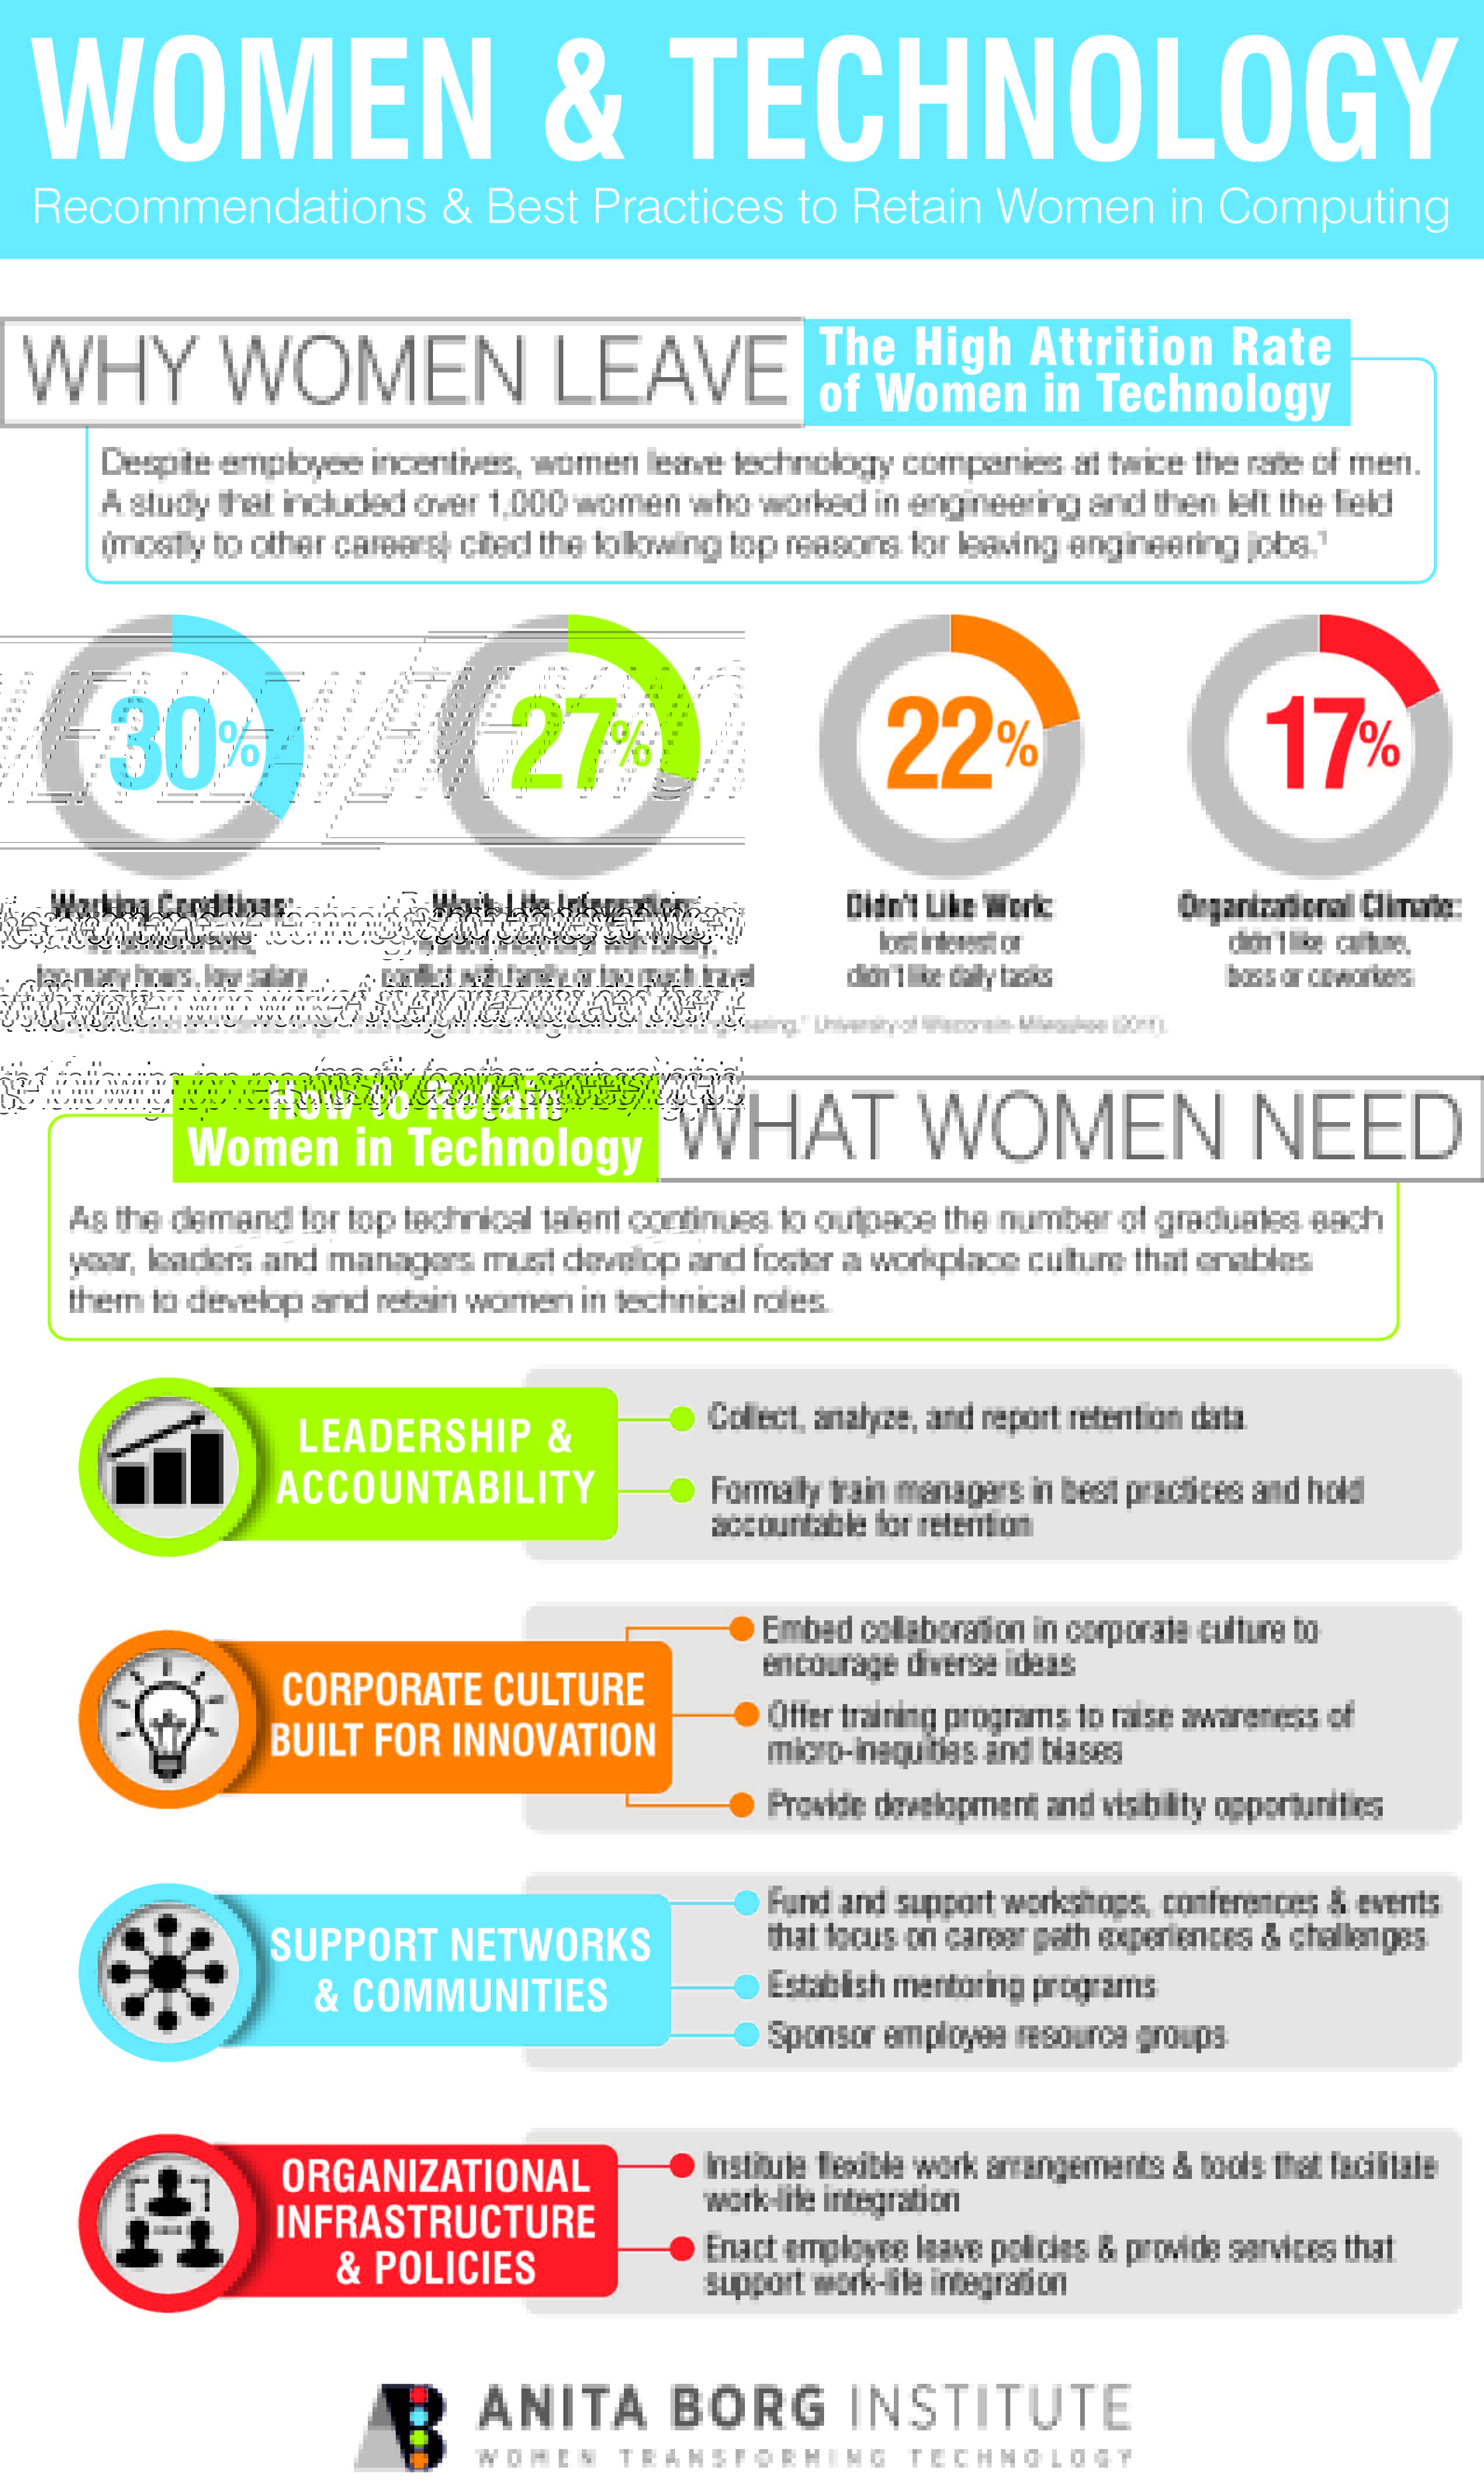 Anita Borg Institute for Women in Technology Infographic used on the friday feminine angle by www.gamificationnation.com